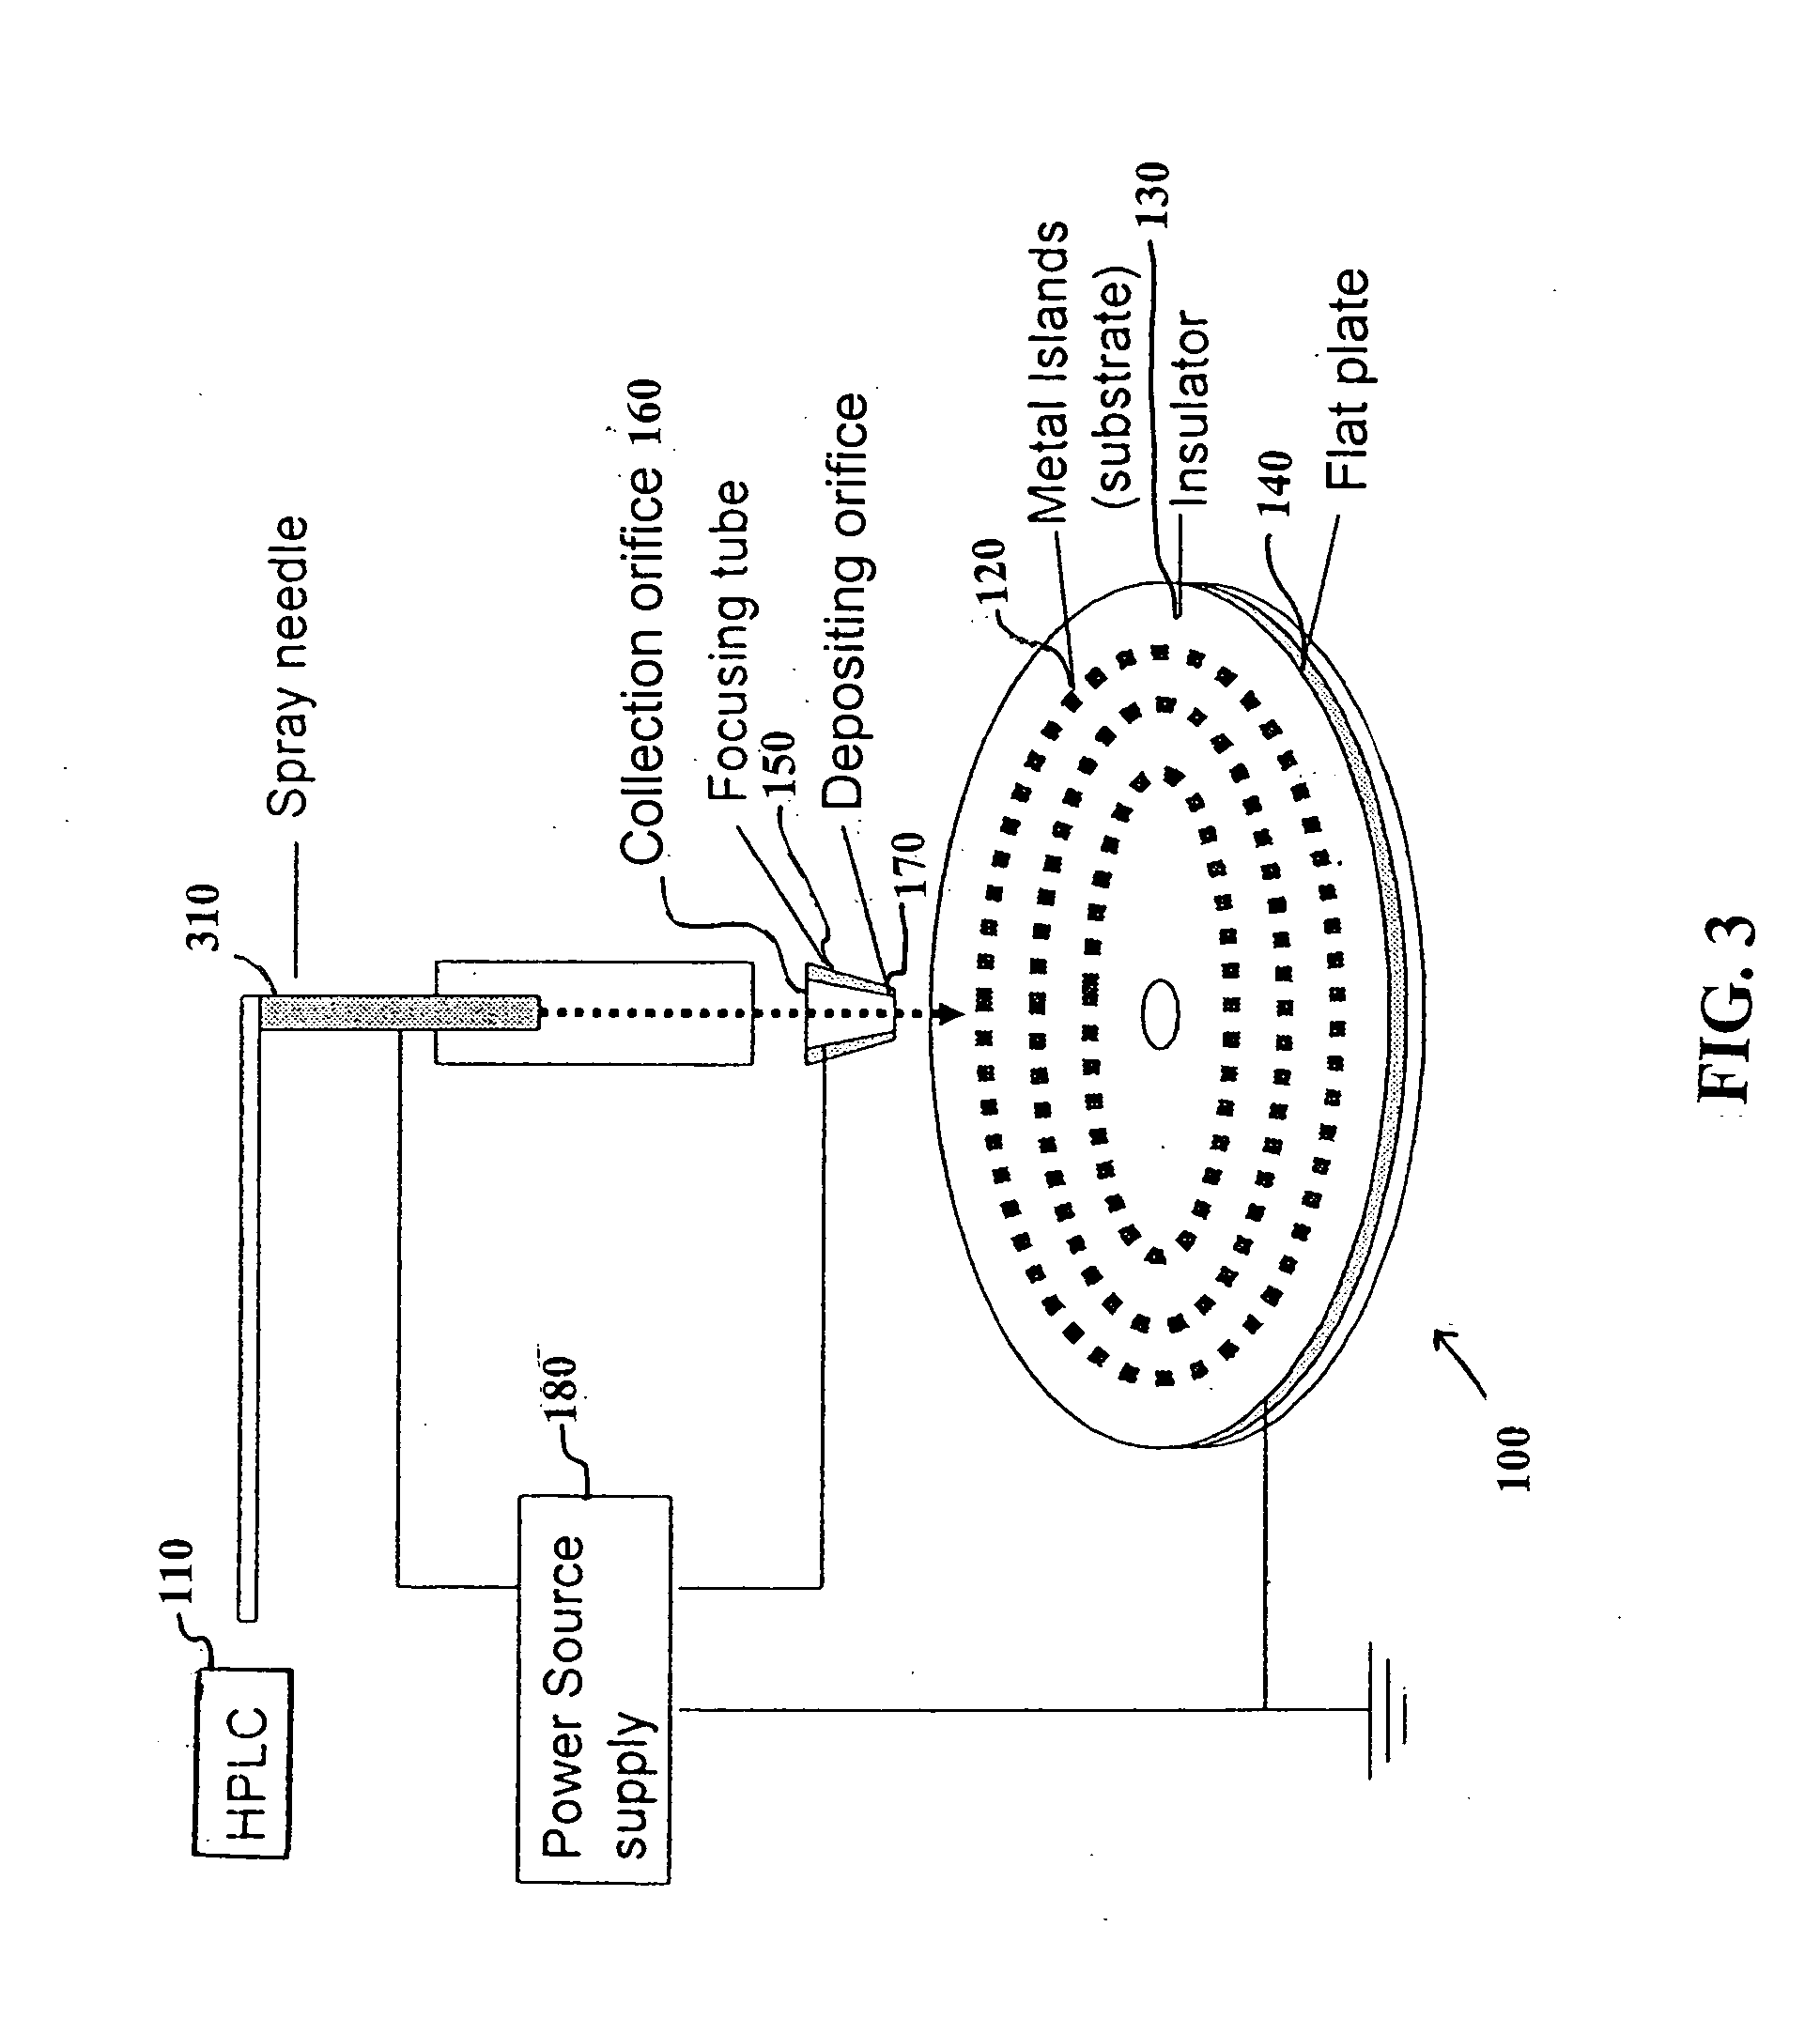 Methods for using raman spectroscopy to obtain a protein profile of a biological sample